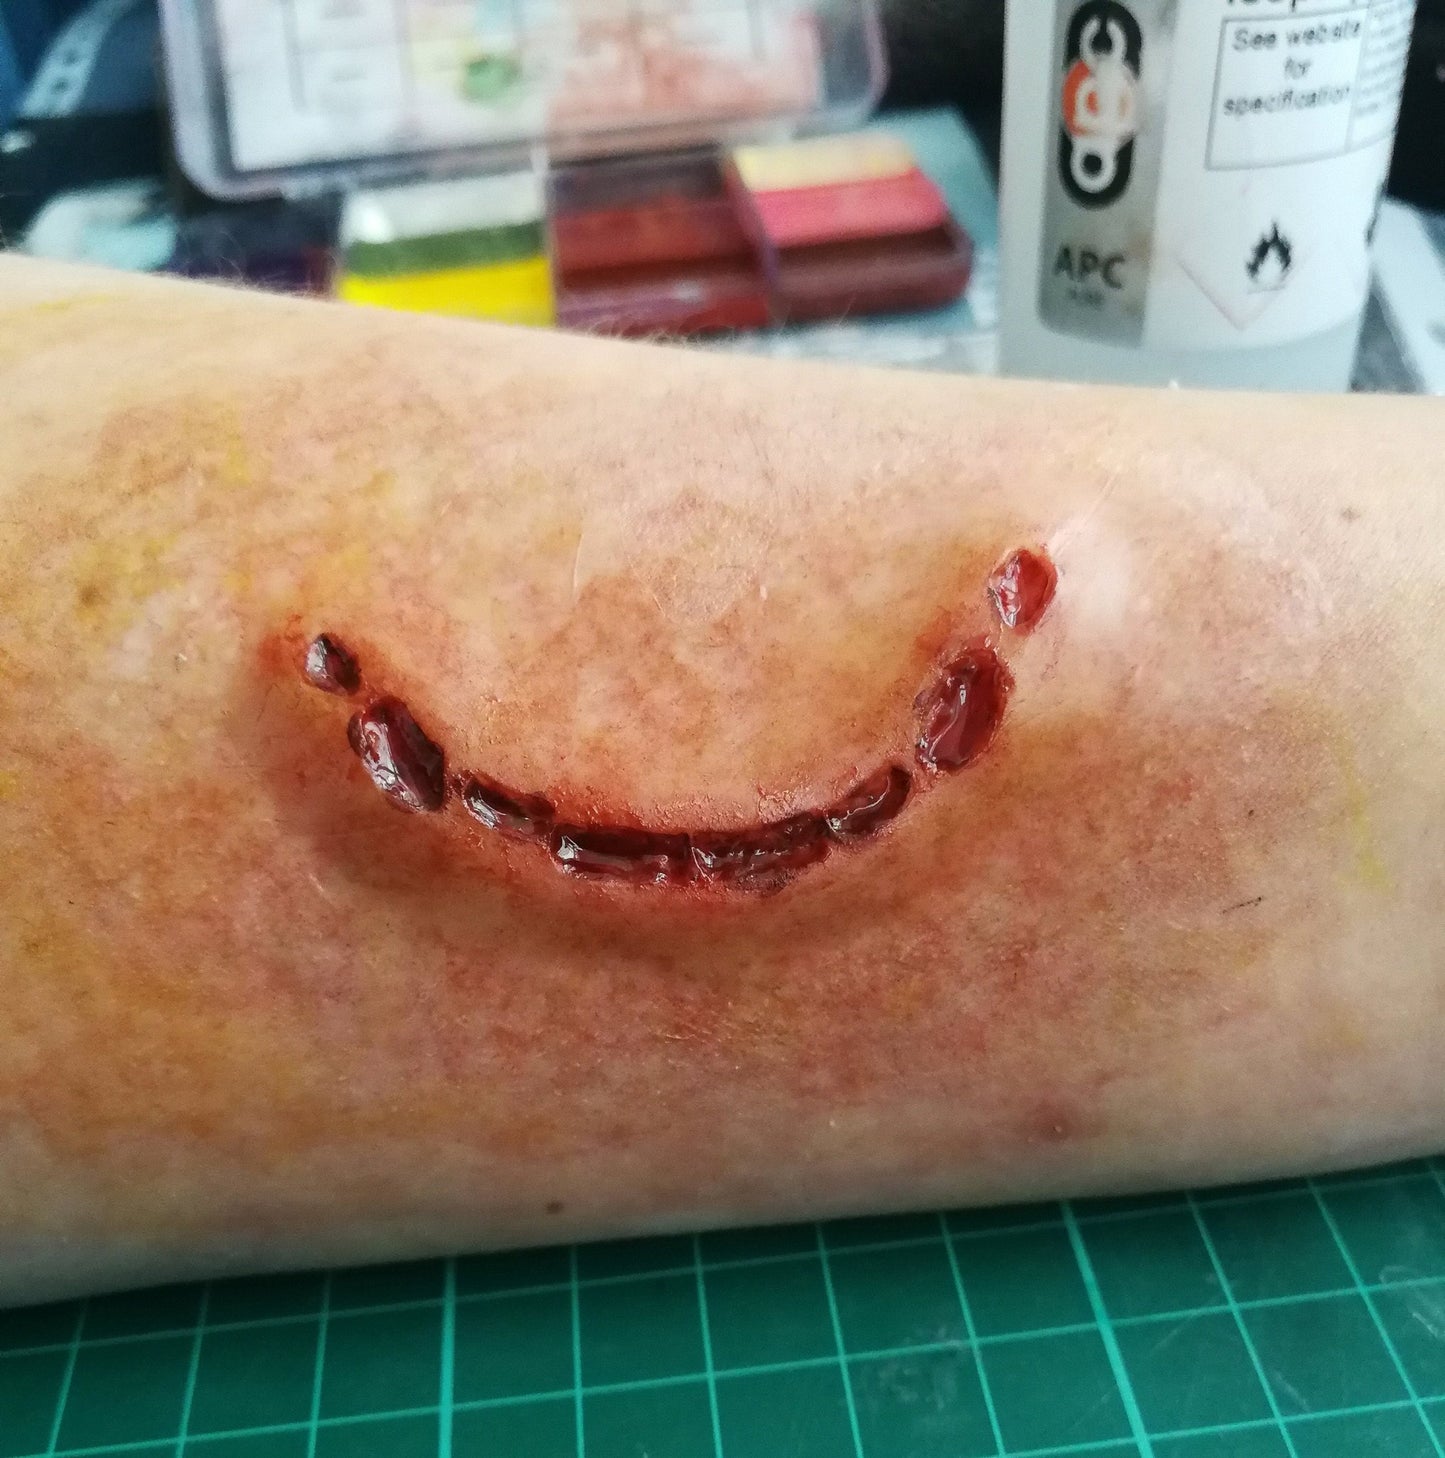 Arm with a bloody half bite on it